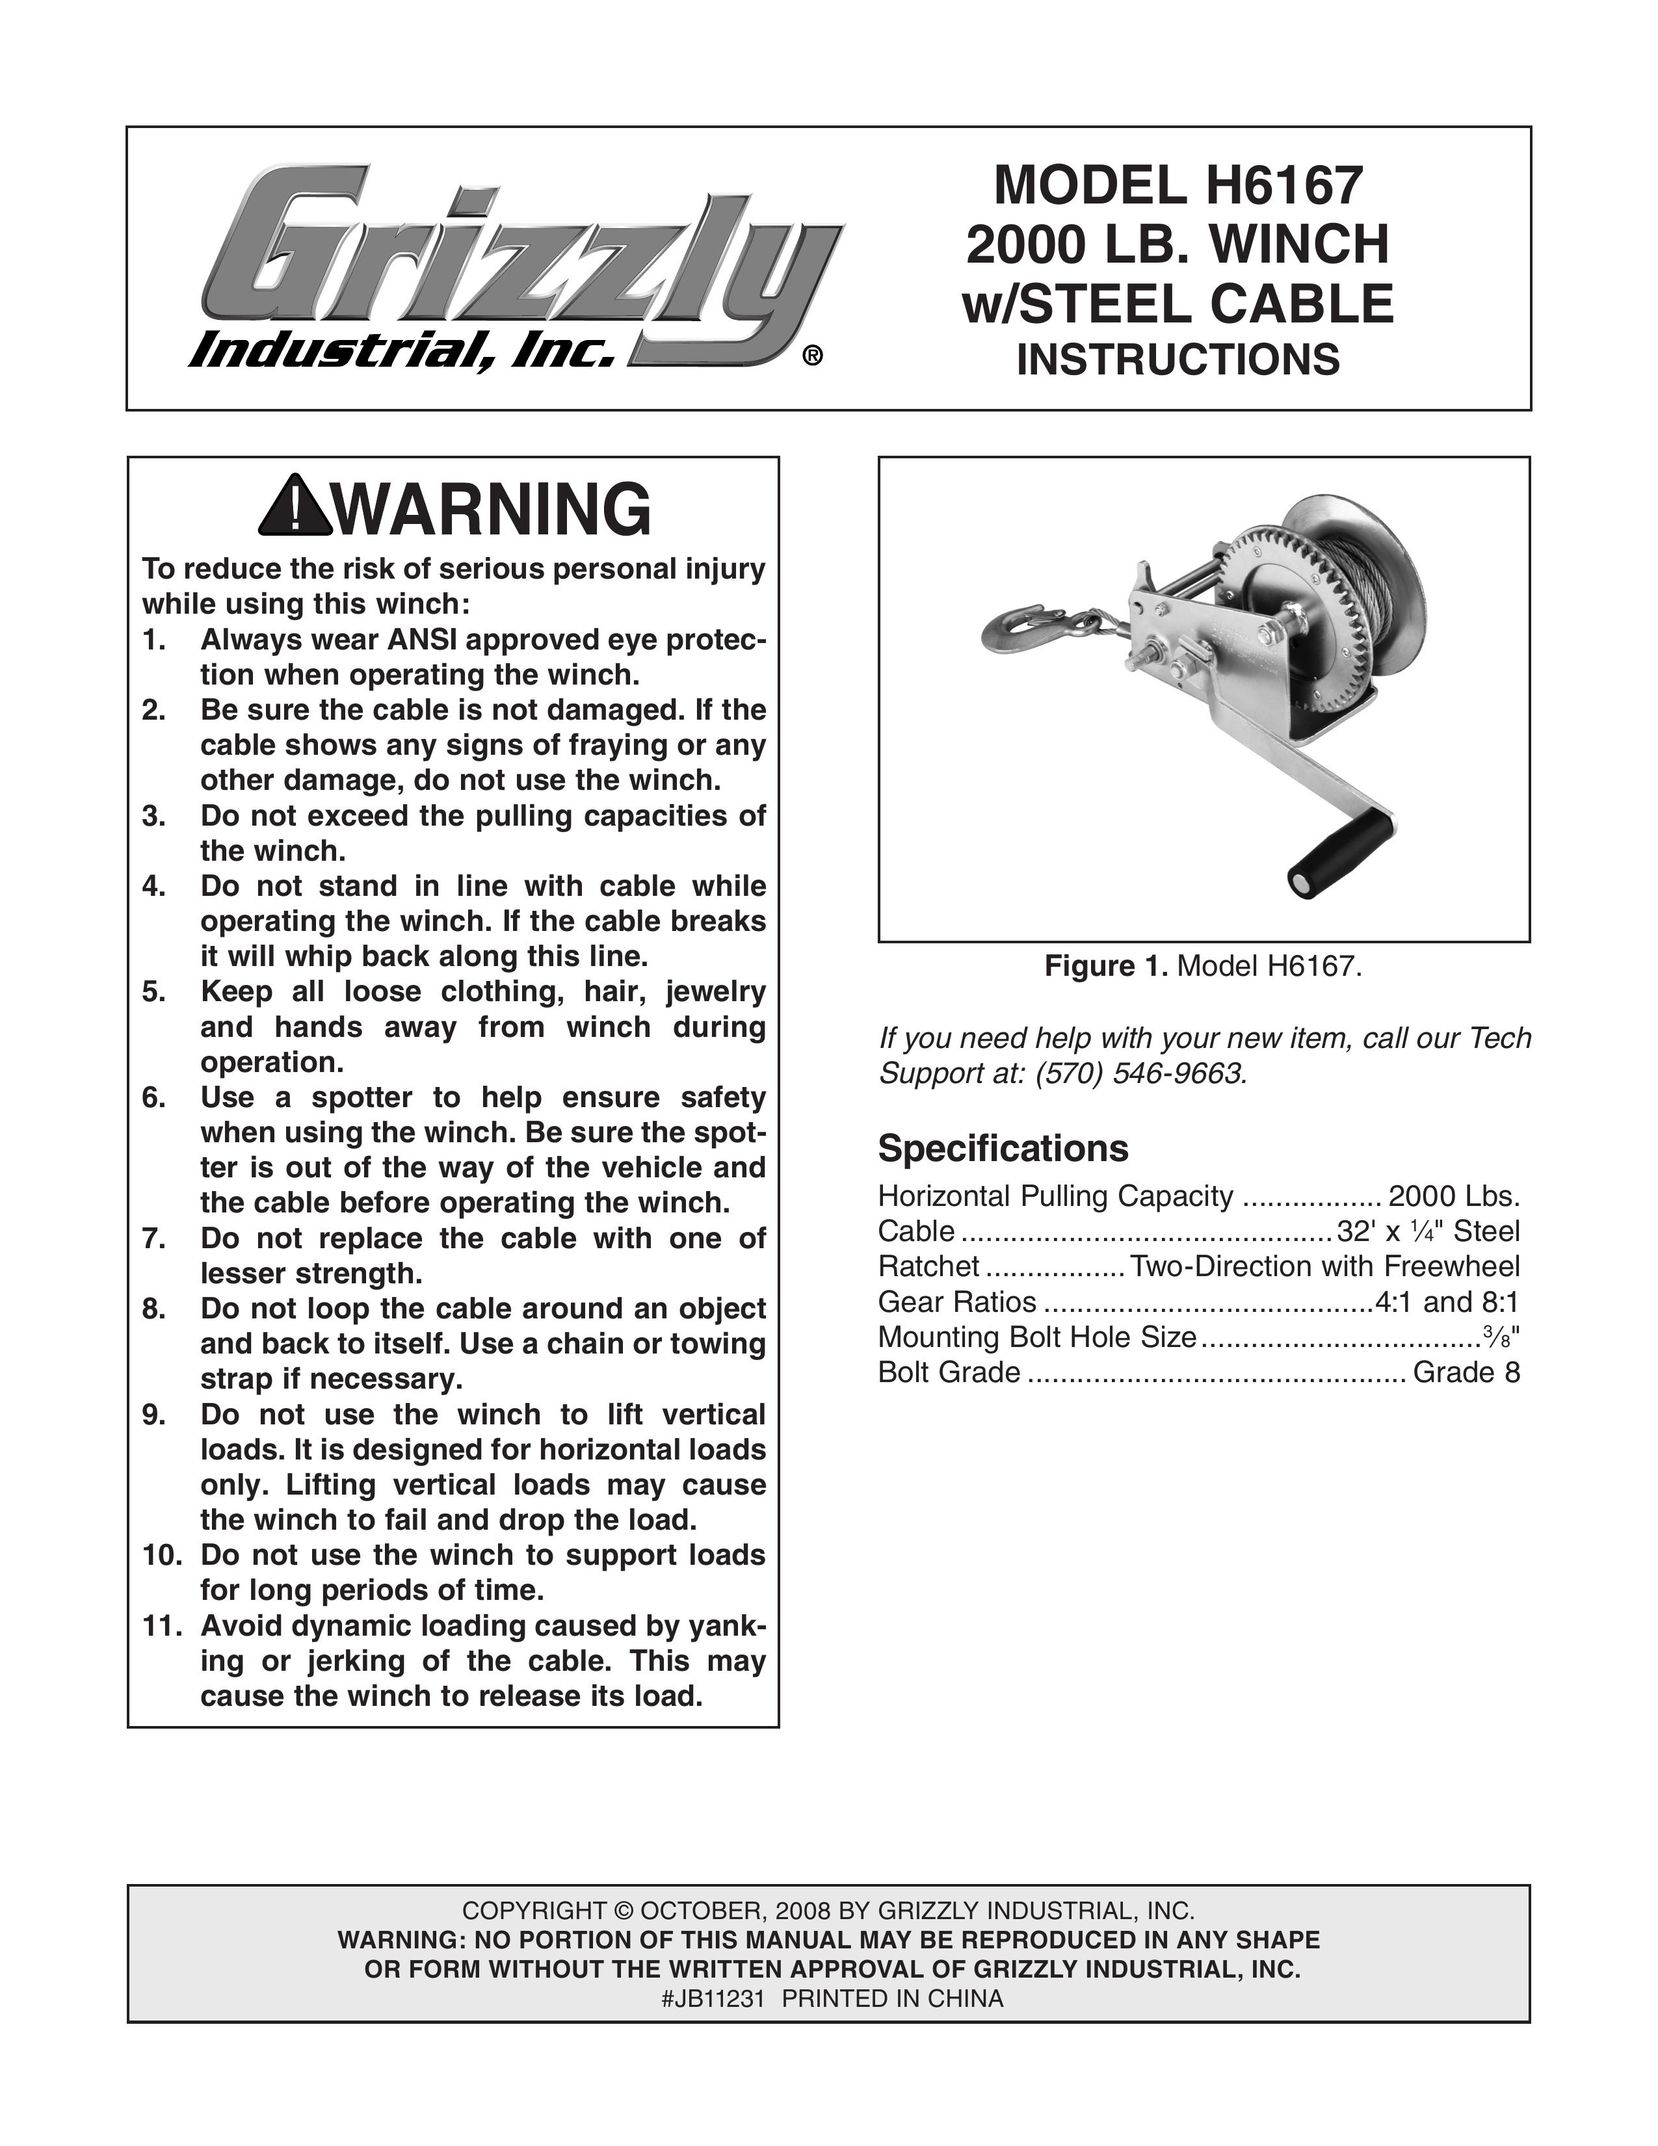 Grizzly H6167 Fishing Equipment User Manual